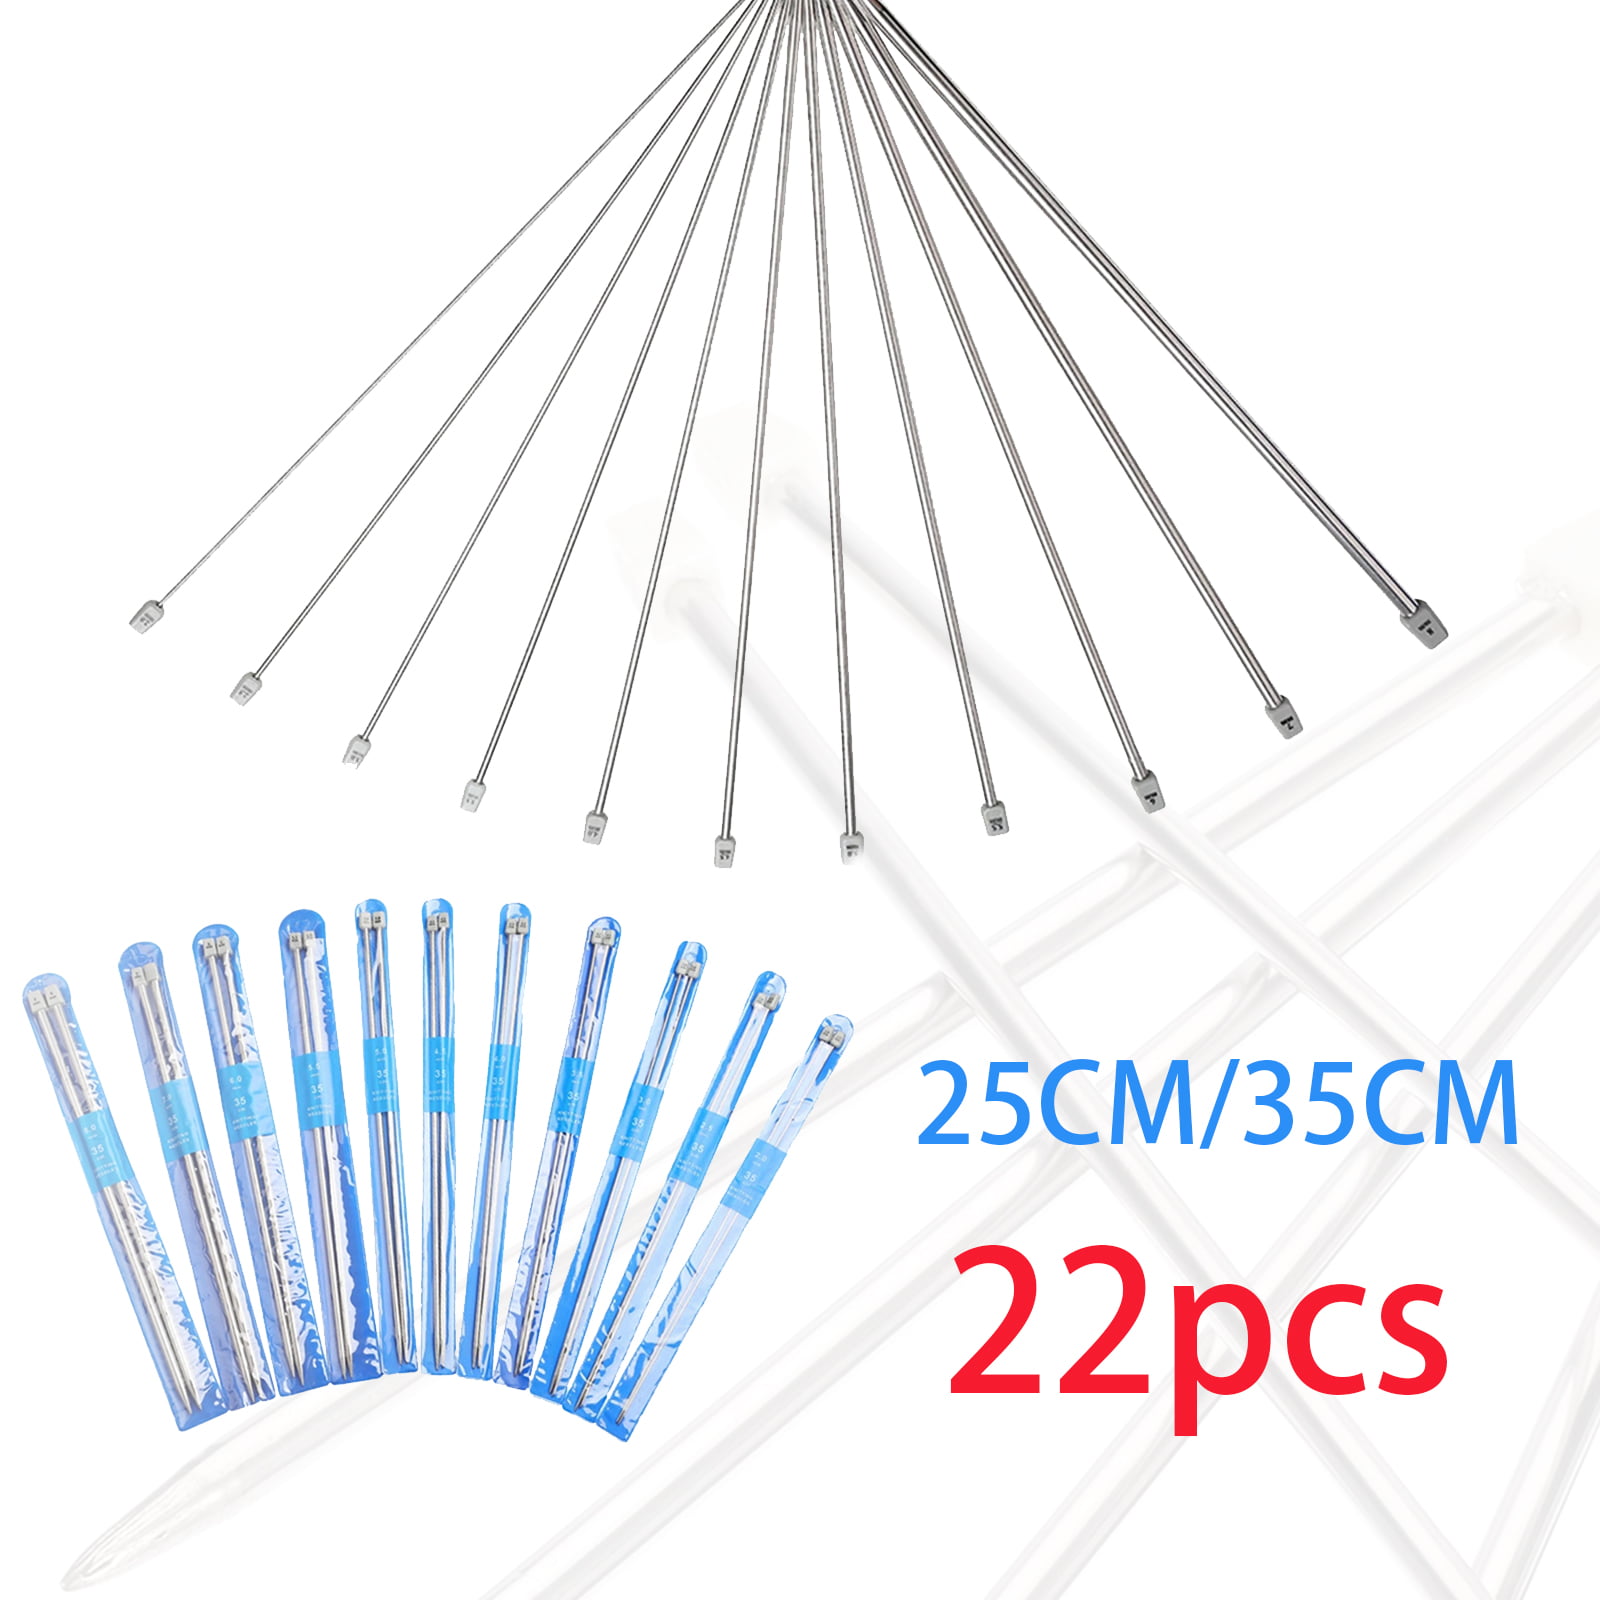 11 Pairs Stainless Steel Knitting Needle Set Gukasxi 11 Sizes from 2.0mm-8.0mm Straight Single Pointed Knitting Needles 25cm Length Knitting Needles for Handmade DIY Knitting Sweater Gift 